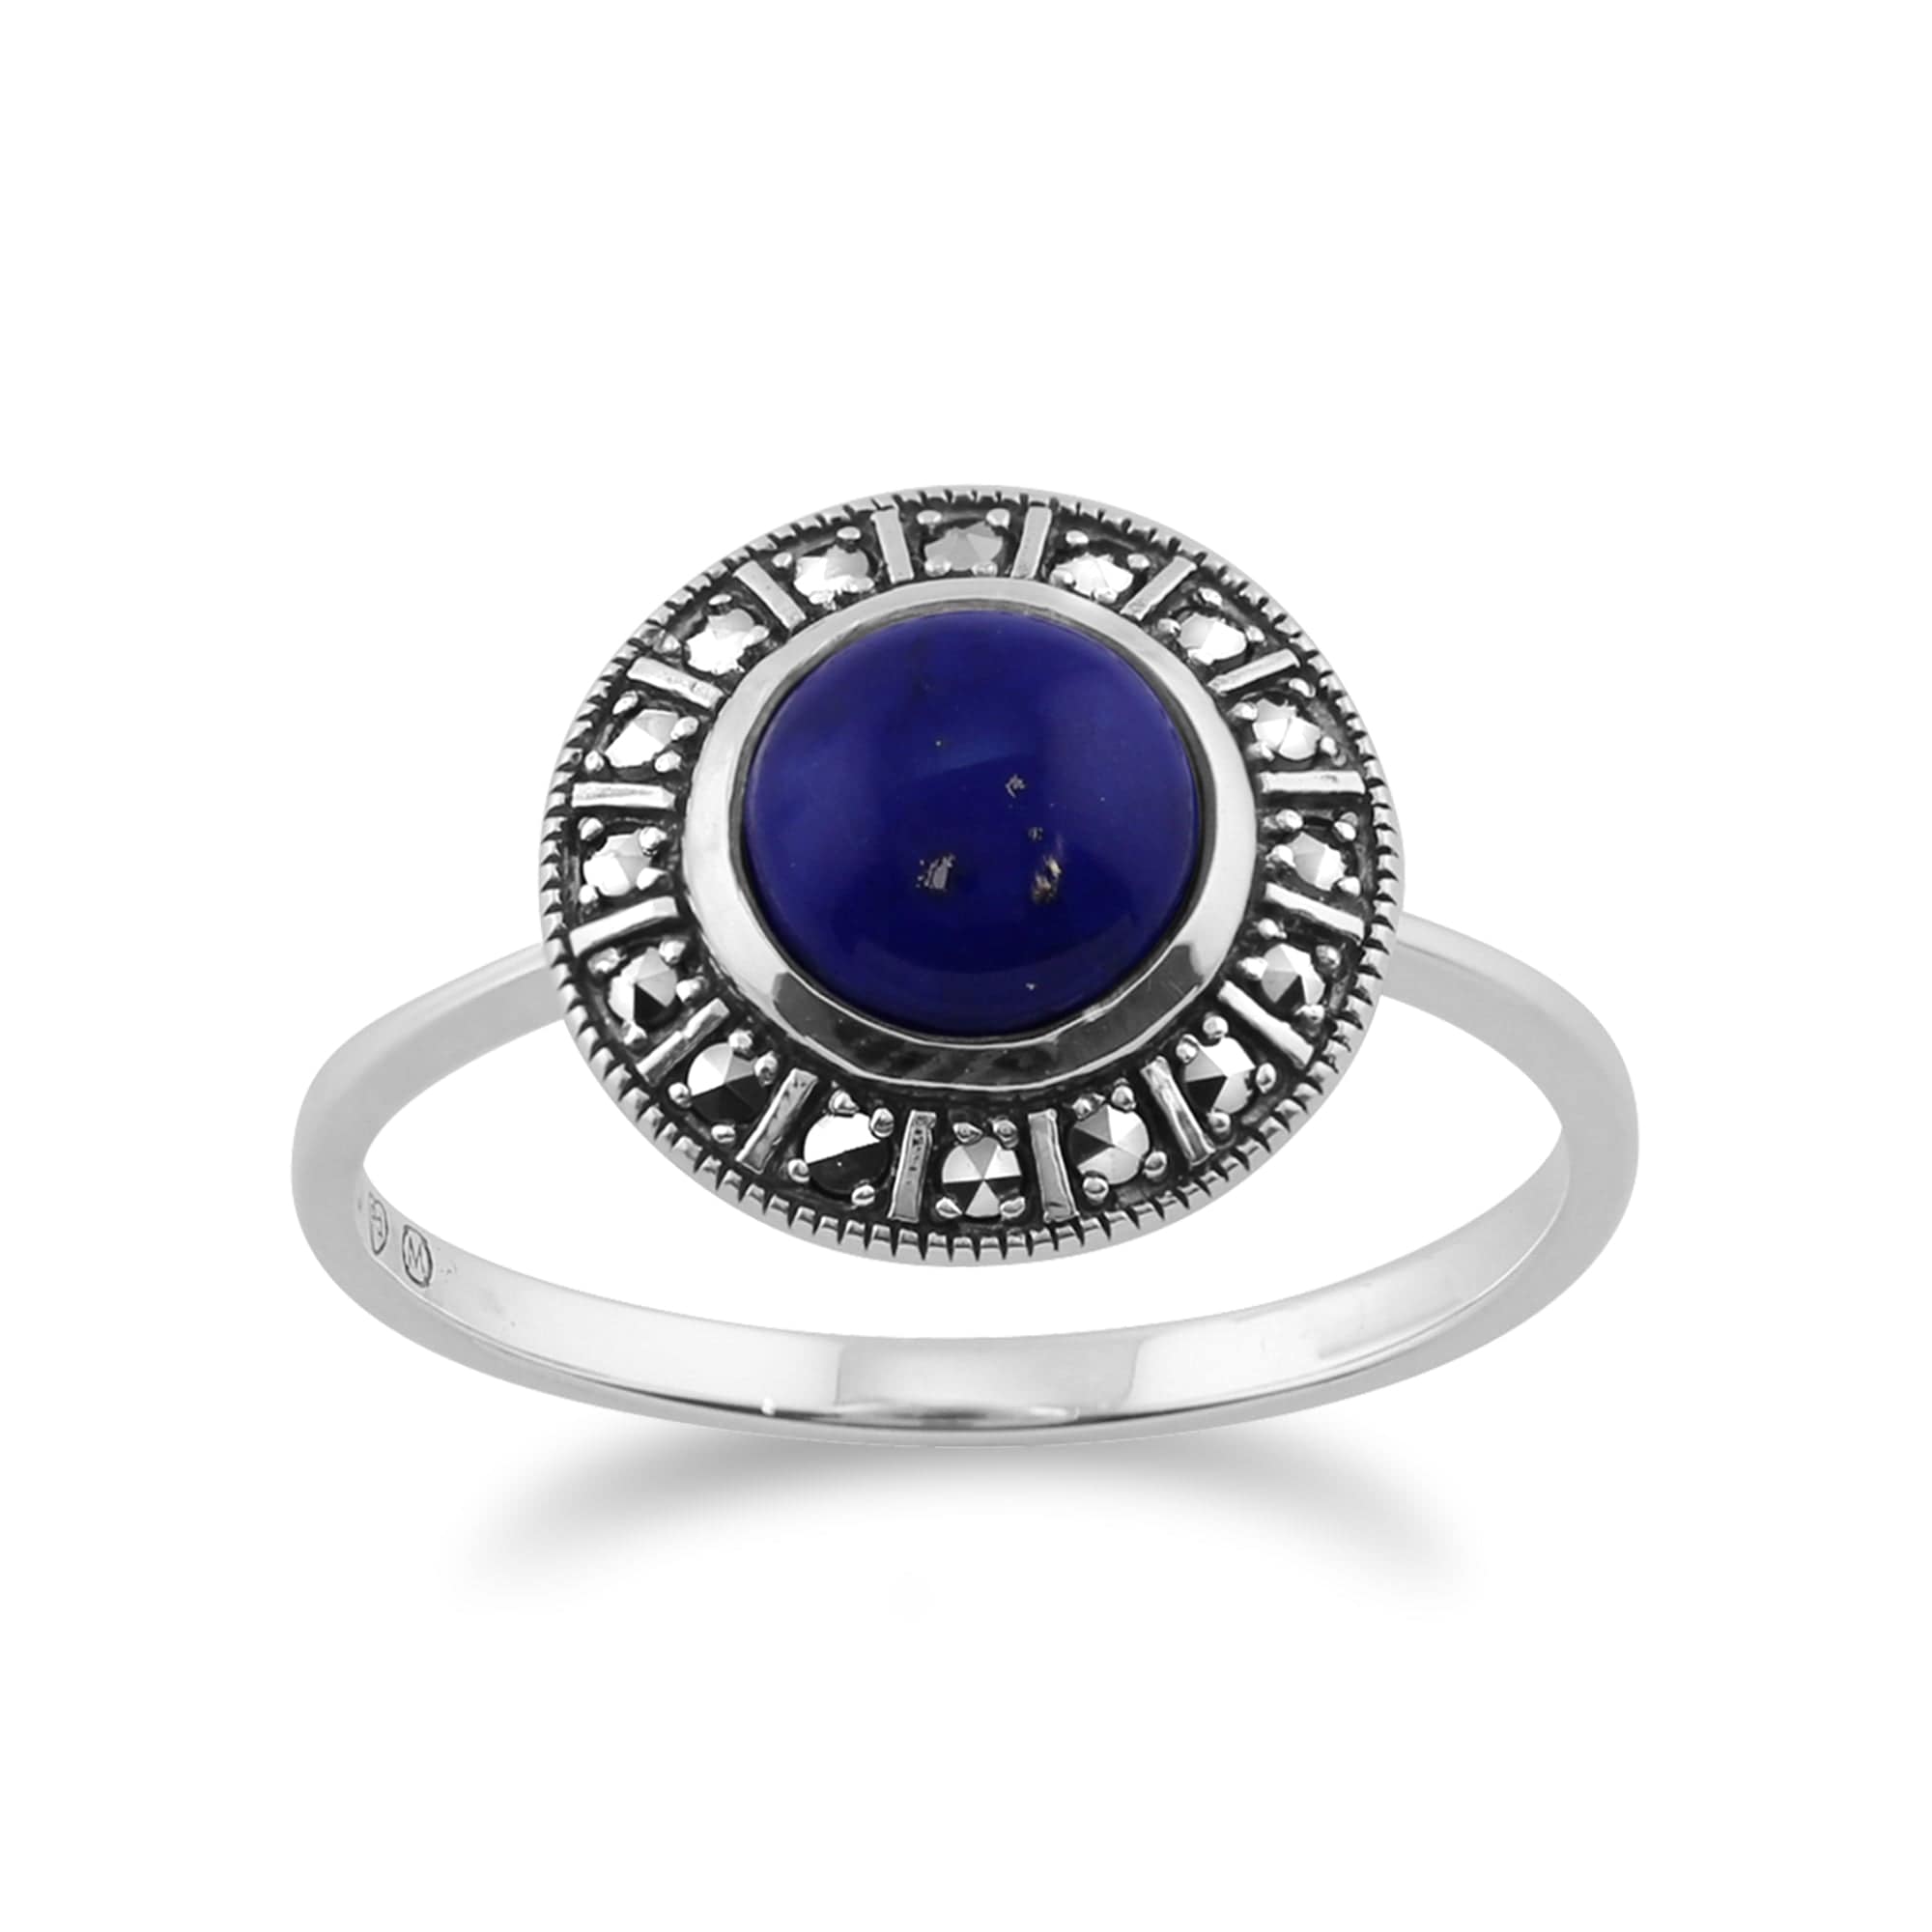 Art Deco Style Round Lapis Lazuli & Marcasite Halo Stud Earrings & Ring Set in 925 Sterling Silver - Gemondo